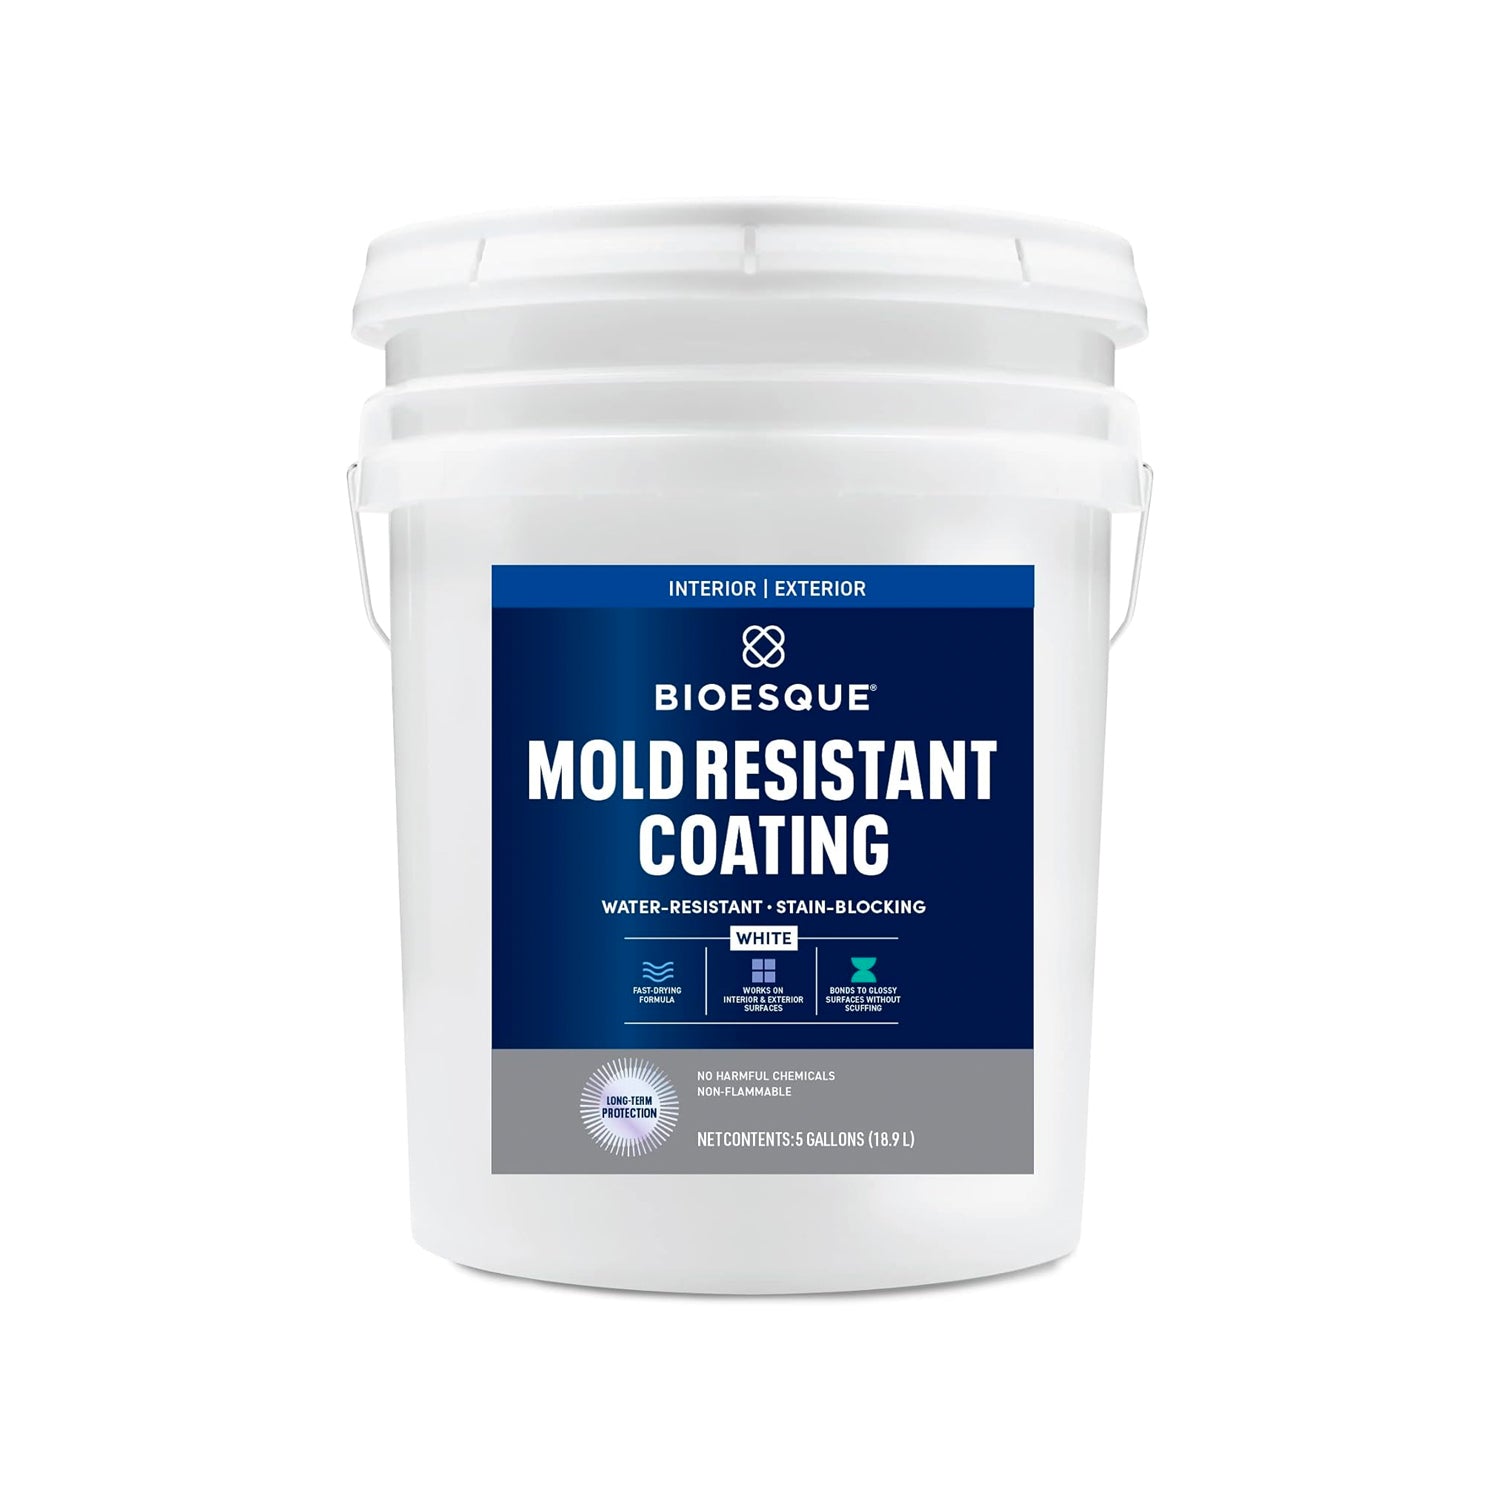 Bioesque Mold Resistant Coating